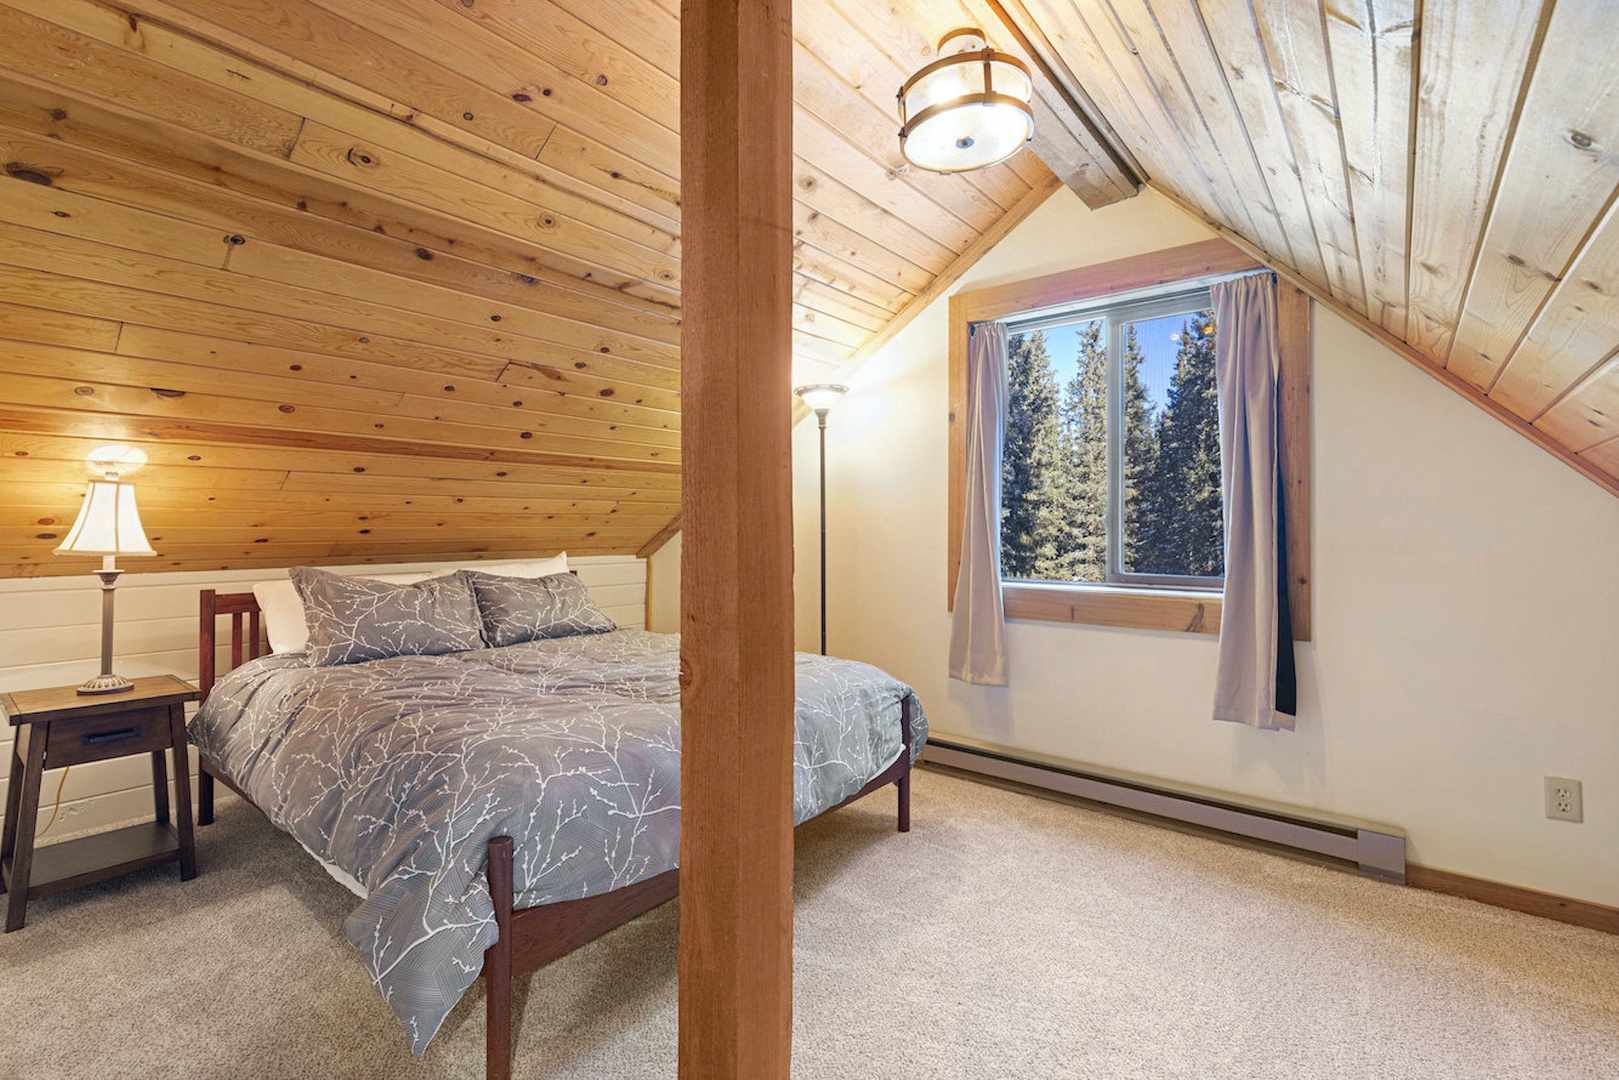 A plush queen bed & private ensuite await in this tranquil upper-level suite